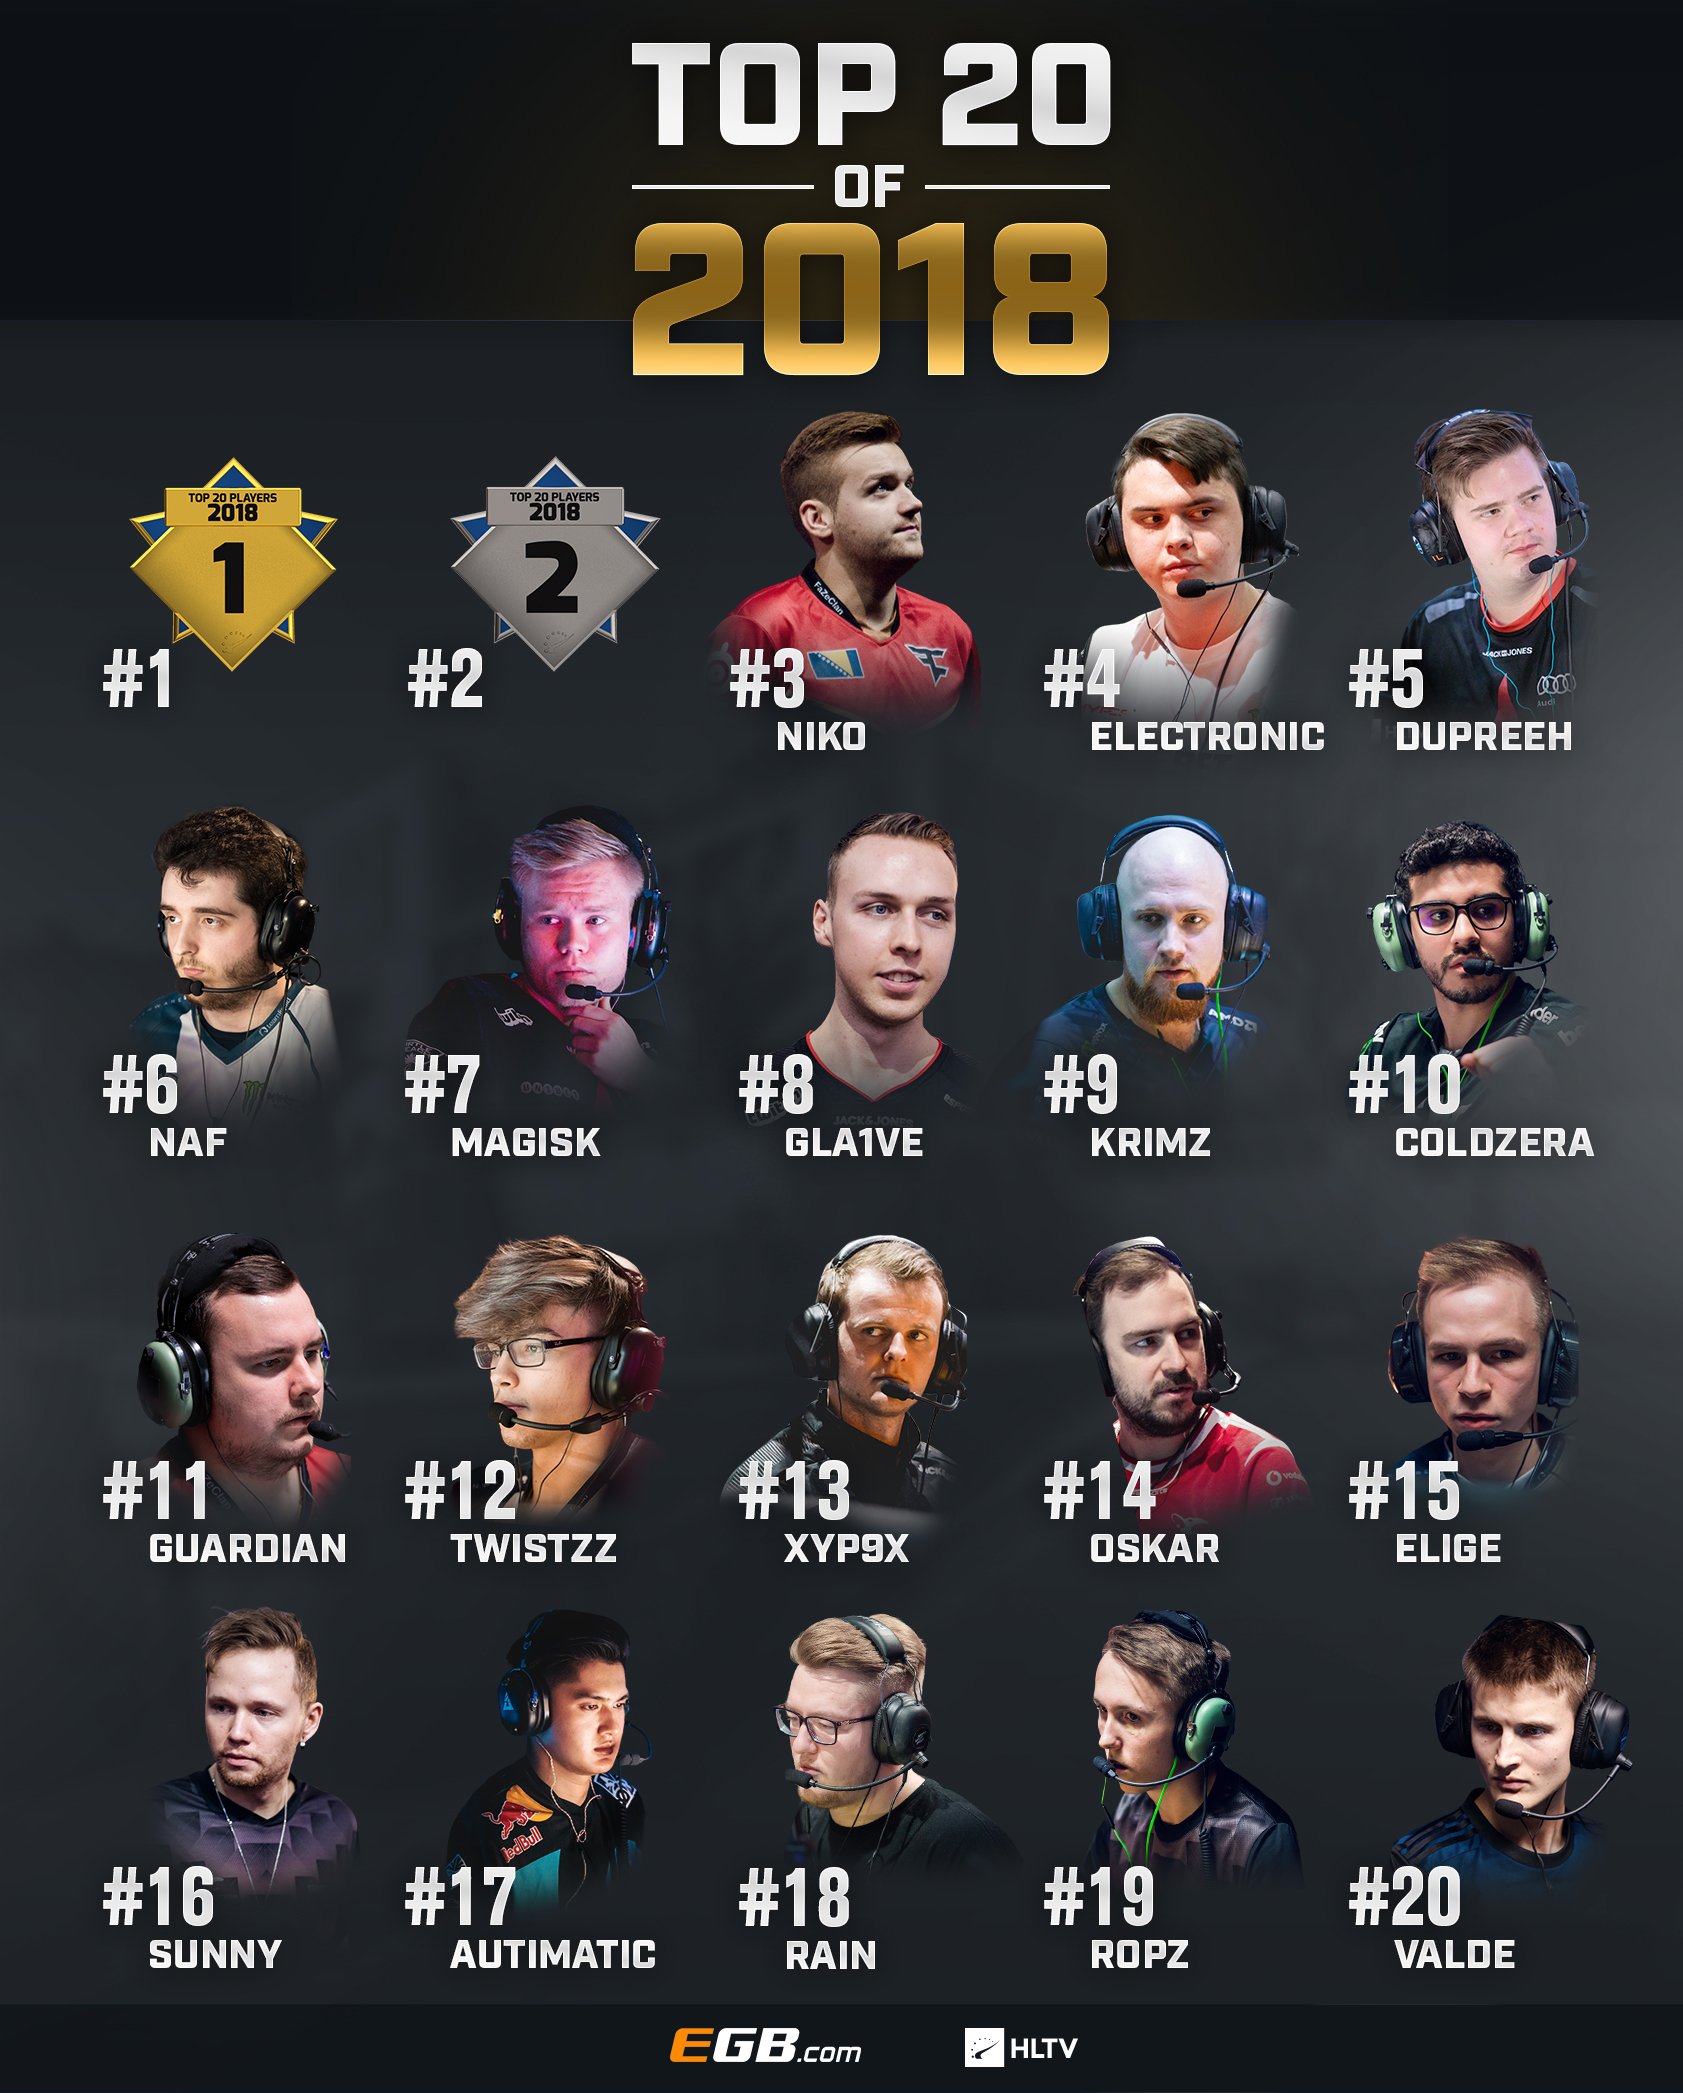 HLTV.org on Twitter: "In 24 hours we will reveal the #1 and #2 of Top 20 players of 2018 ranking simultaneously! While waiting take a look the players who have